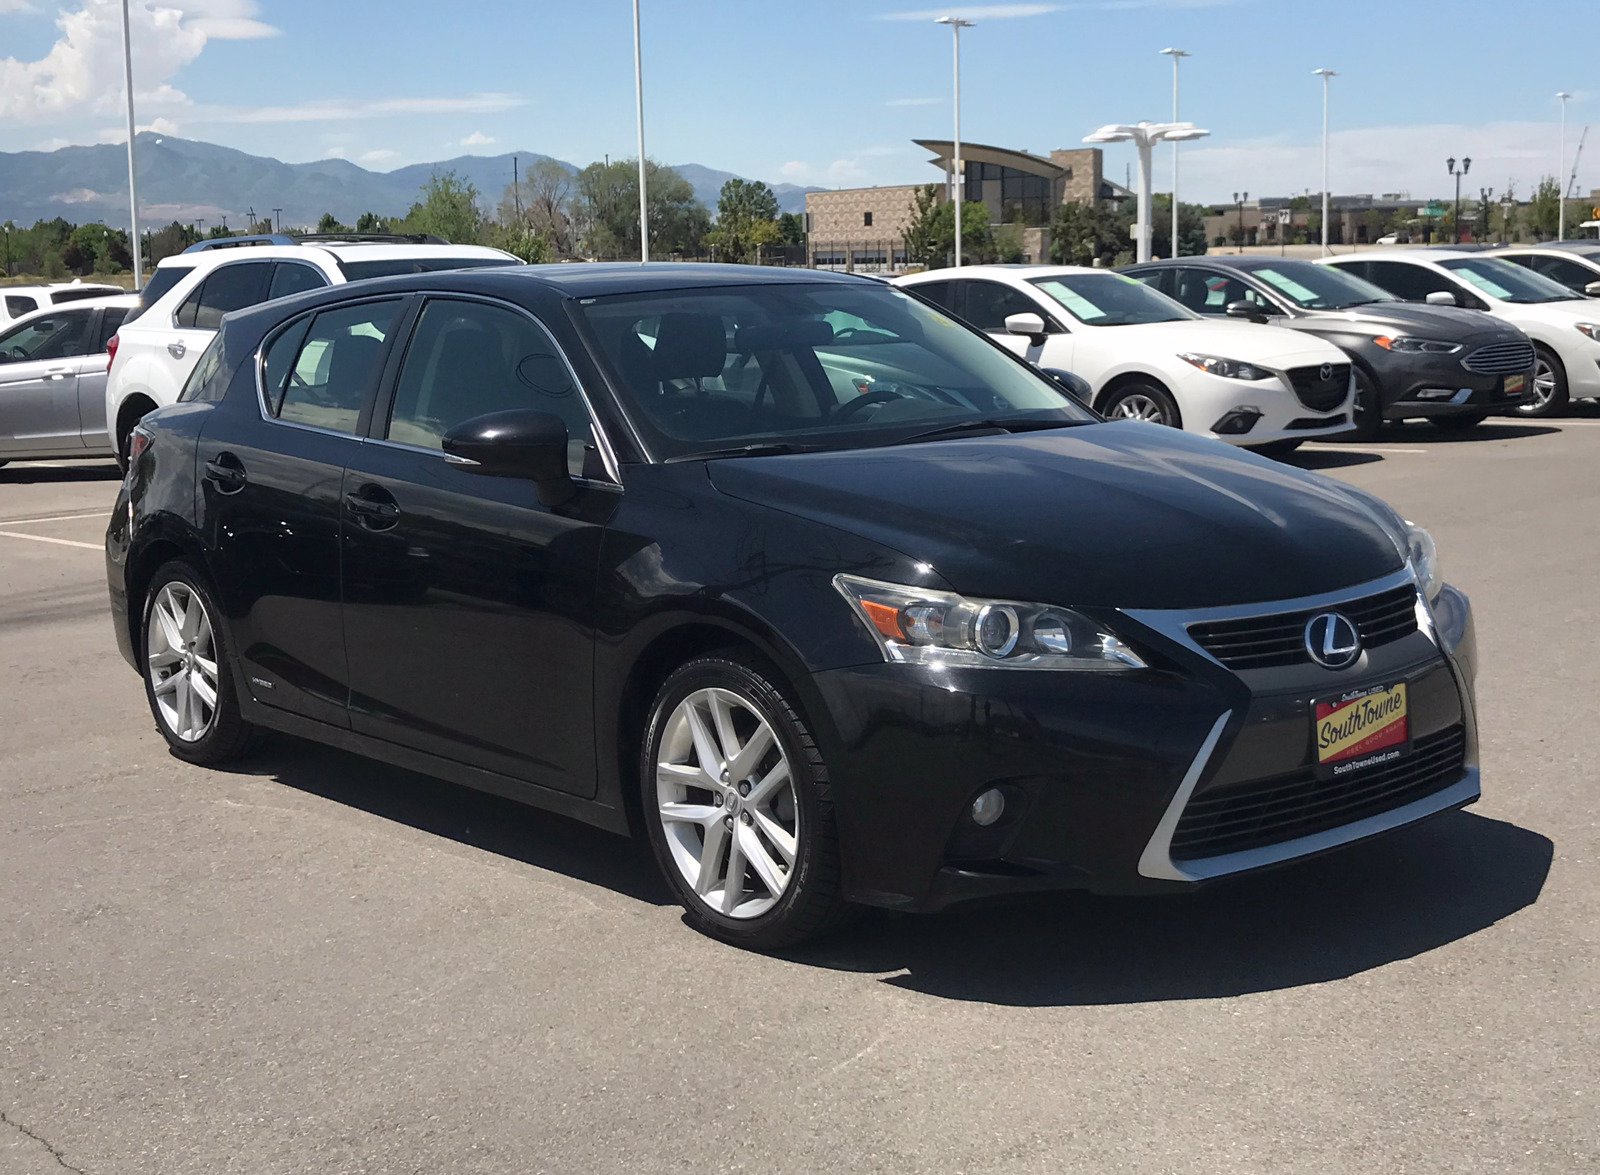 PreOwned 2014 Lexus CT 200h Hybrid Hatchback in South